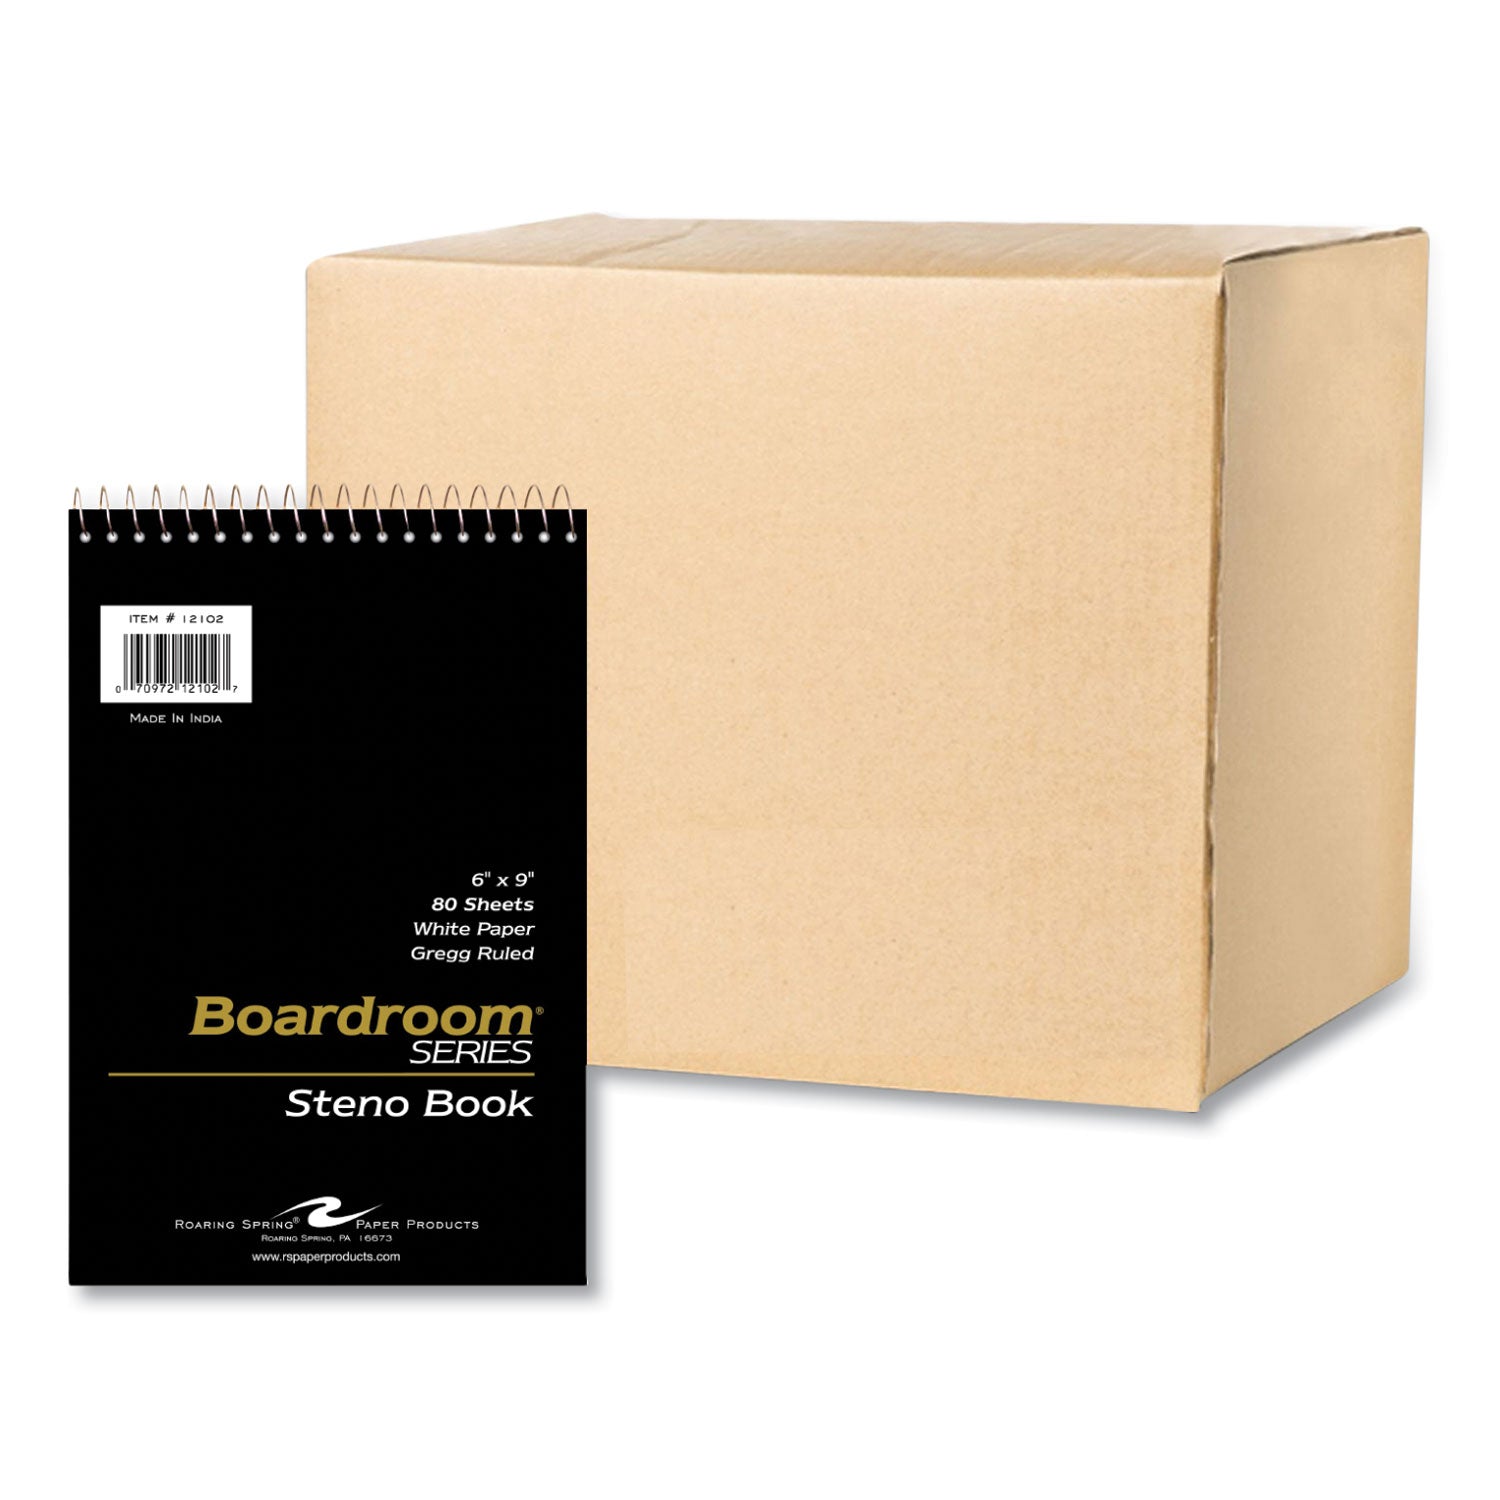 boardroom-series-steno-pad-gregg-rule-brown-cover-80-white-6-x-9-sheets-72-pads-carton-ships-in-4-6-business-days_roa12102cs - 1